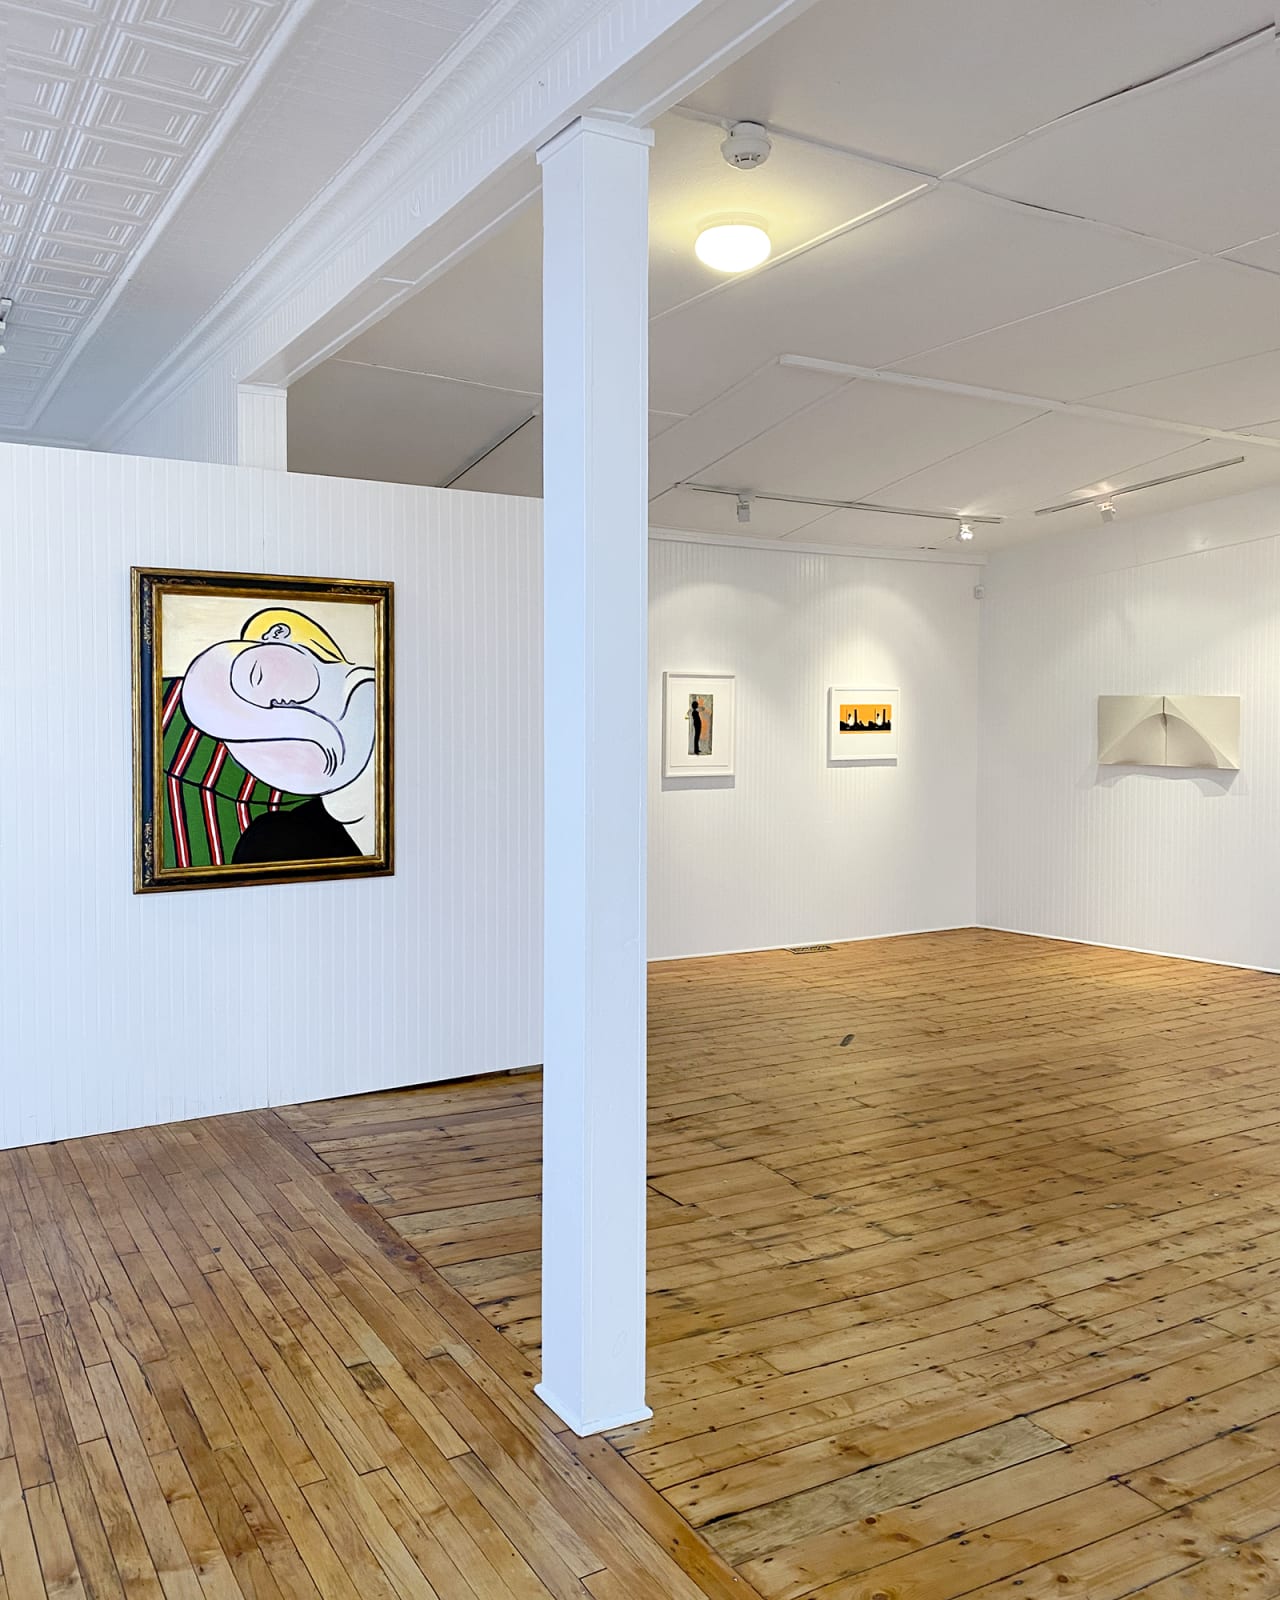 Installation view: Line, Shape, Color, and Form